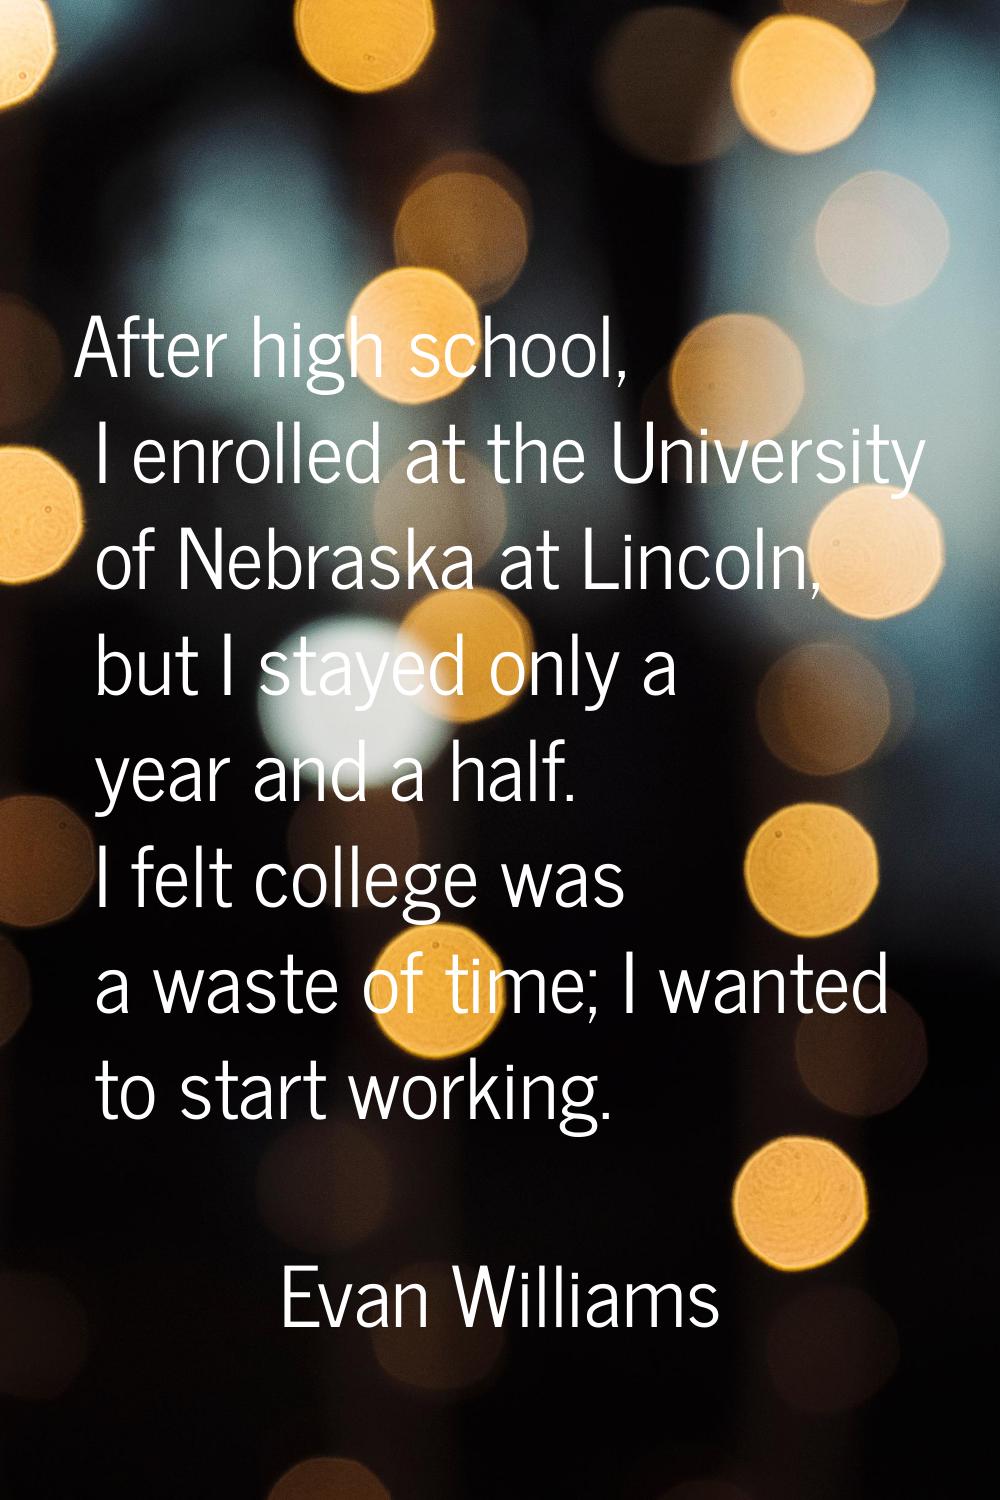 After high school, I enrolled at the University of Nebraska at Lincoln, but I stayed only a year an